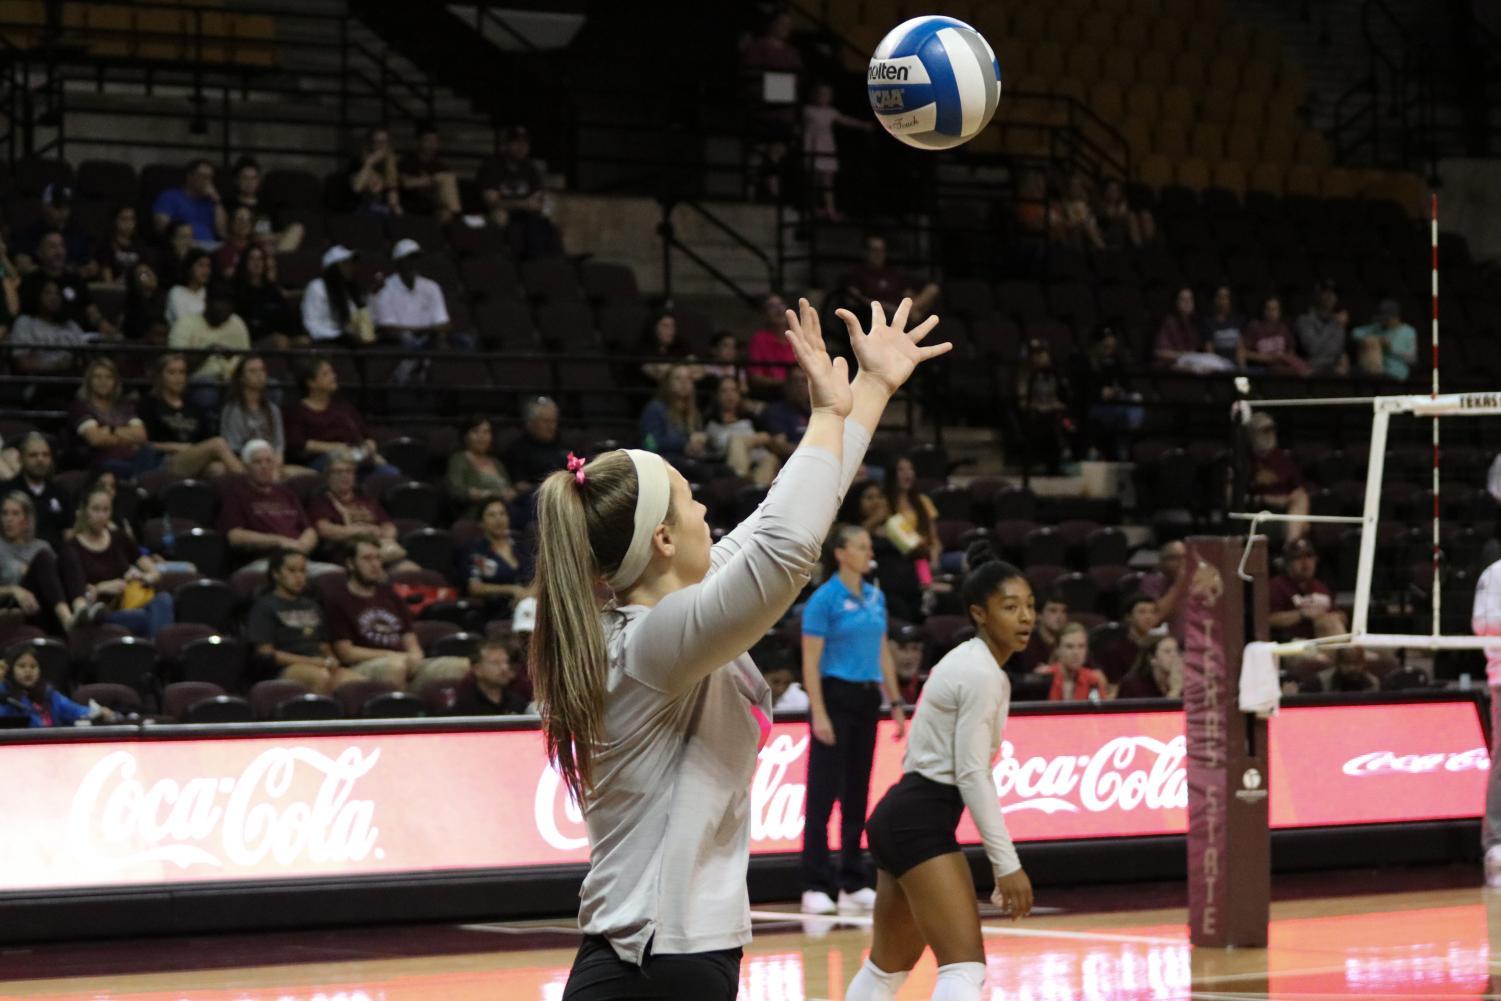 %28Photo+Gallery%29+Texas+State+volleyball+vs.+South+Alabama%2C+Oct.+19%2C+2019